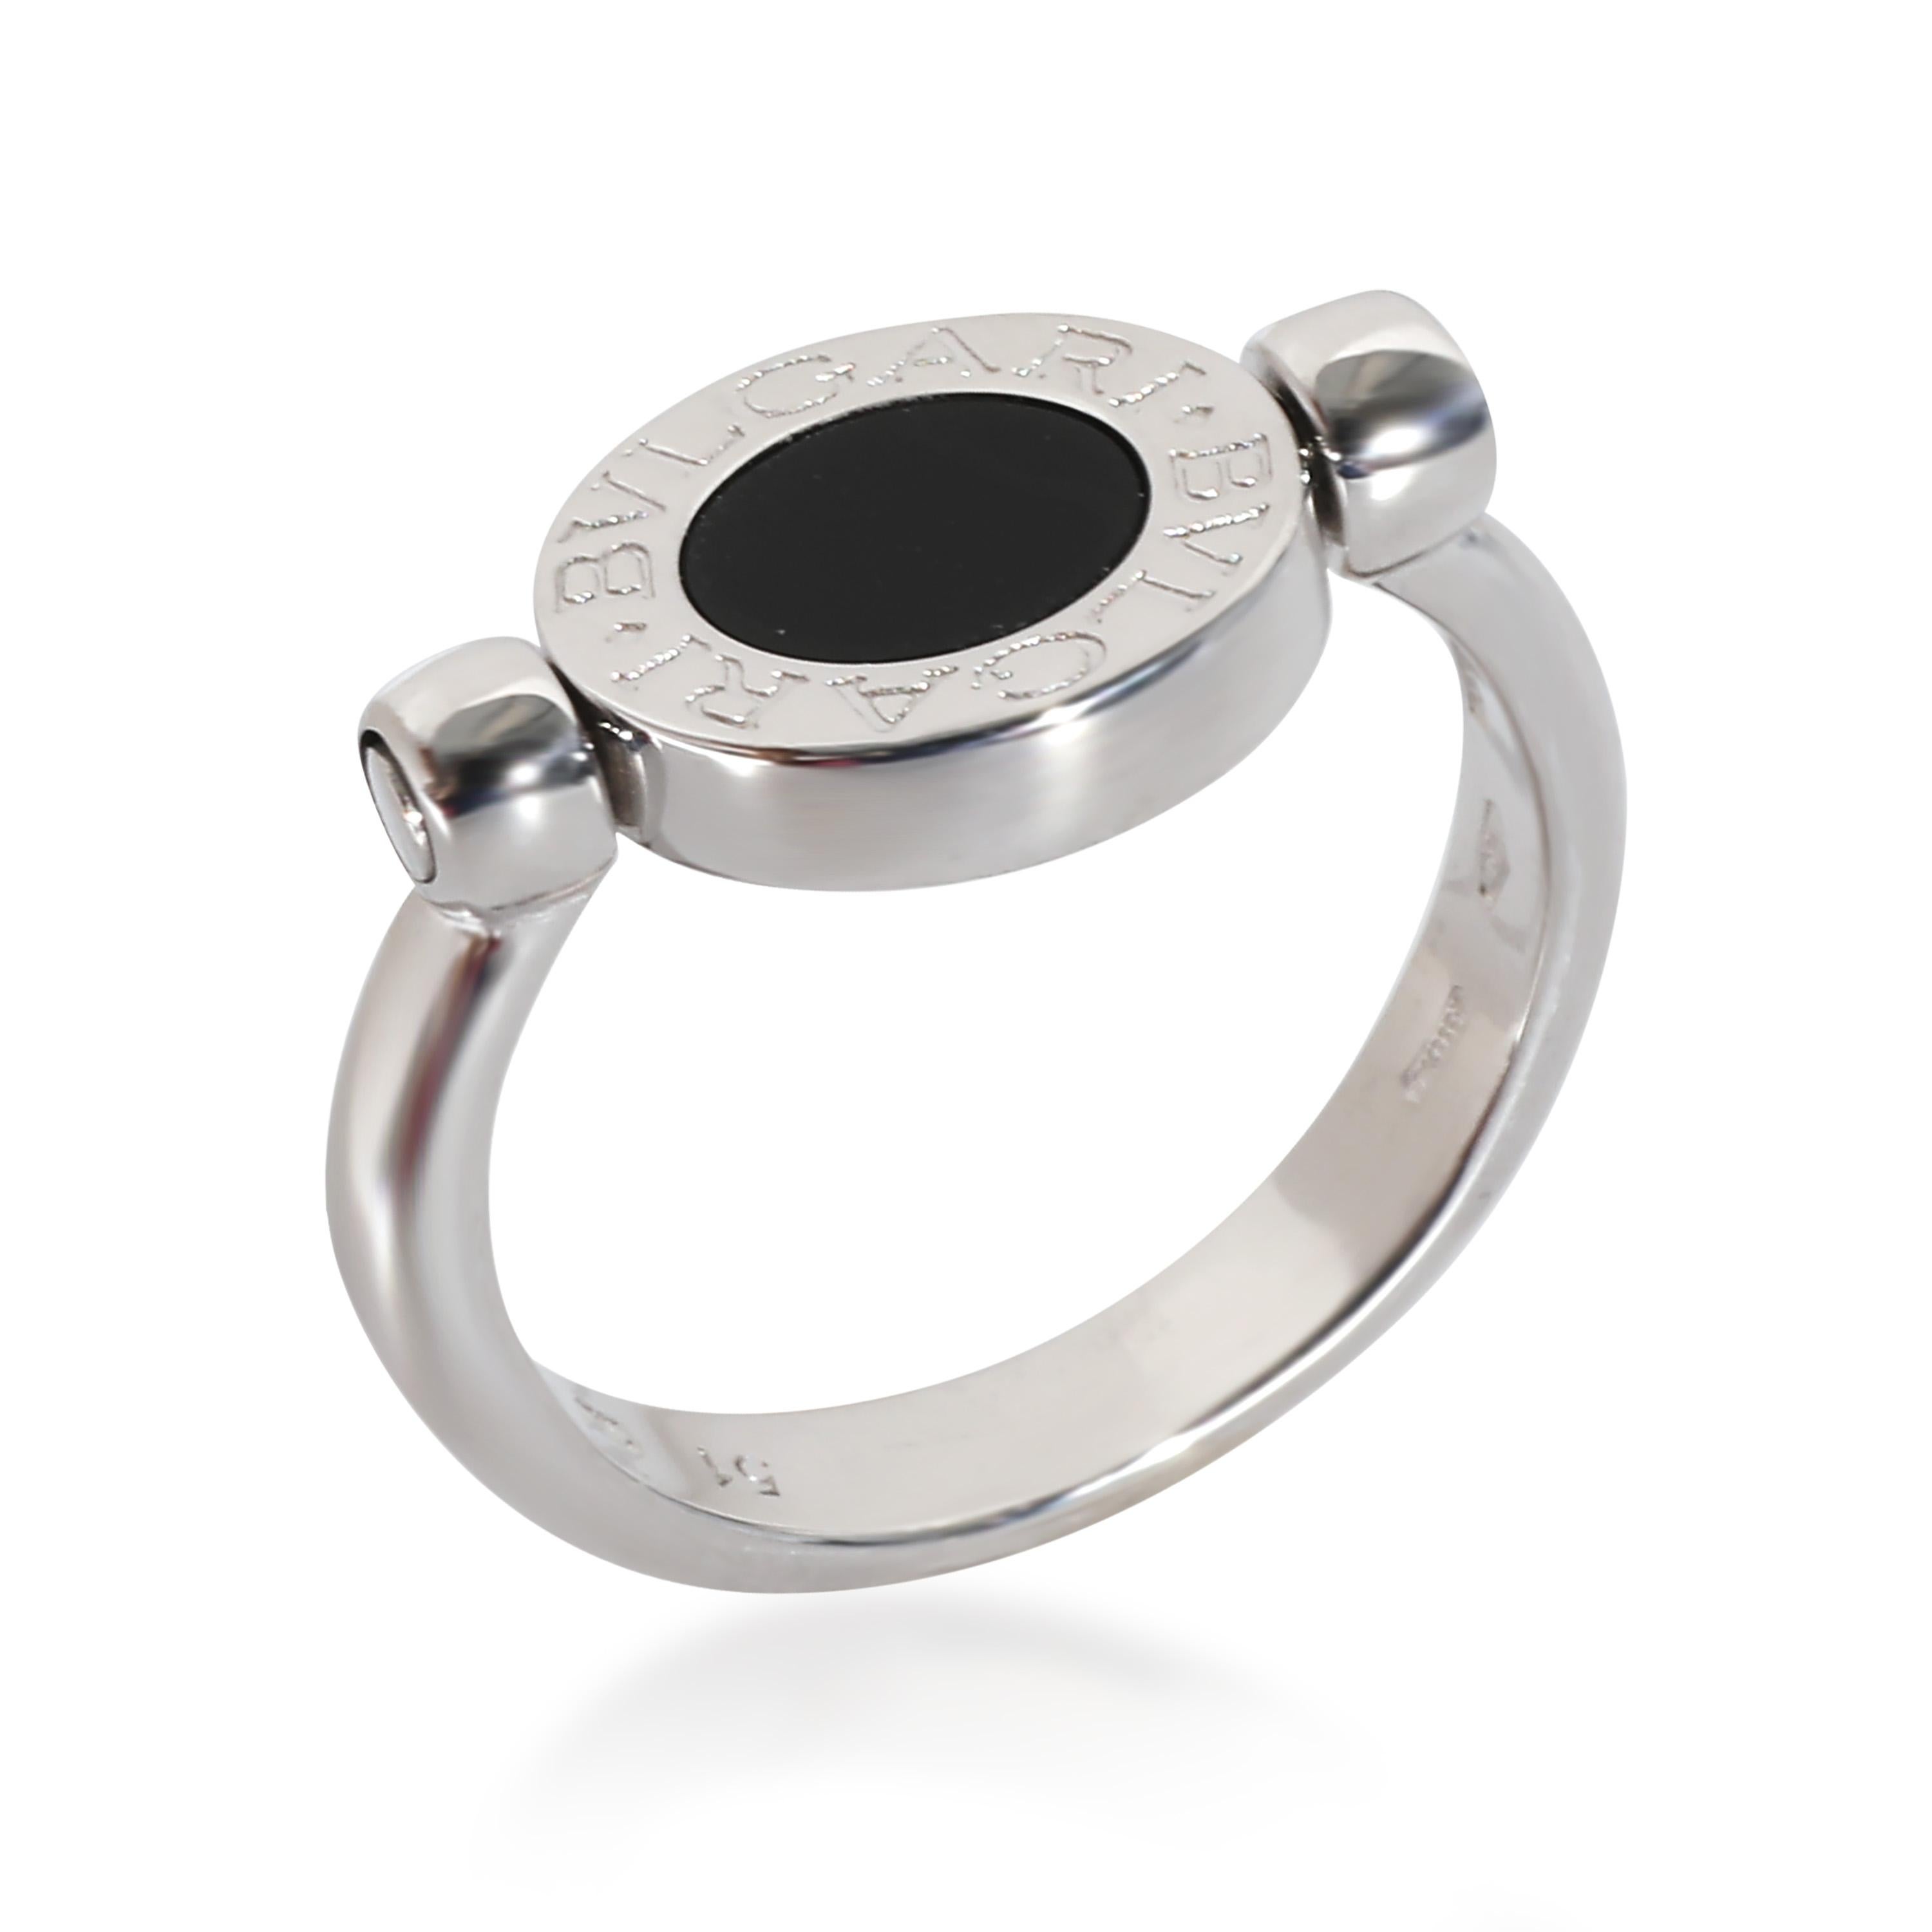 BVLGARI Bvlgari Bvlgari Onyx Diamond Ring in 18 KT White Gold Black 0.14 In Excellent Condition For Sale In New York, NY